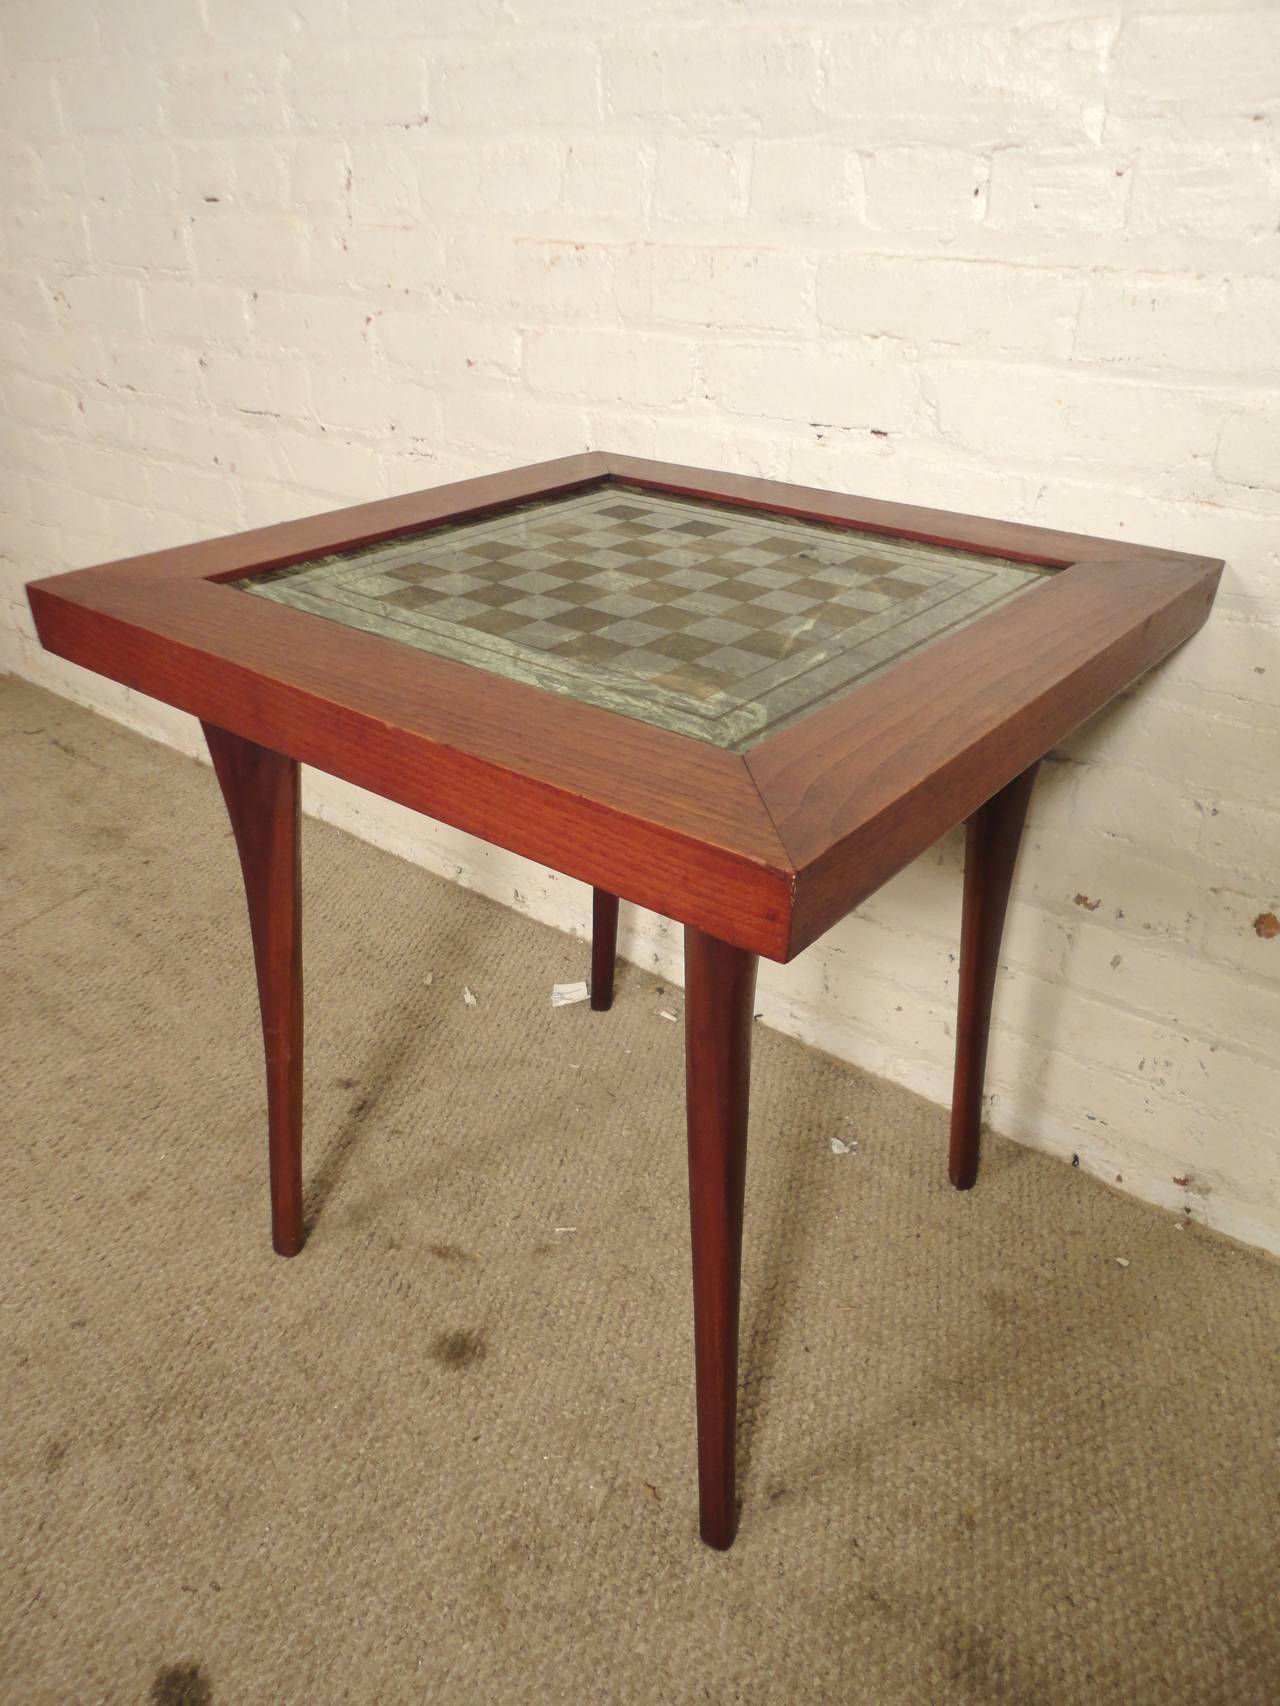 Vintage side table with marble chess or checkers inlay. Sculpted legs, wood frame, beautiful green marble with checkered pattern.

(Please confirm item location, NY or NJ, with dealer).